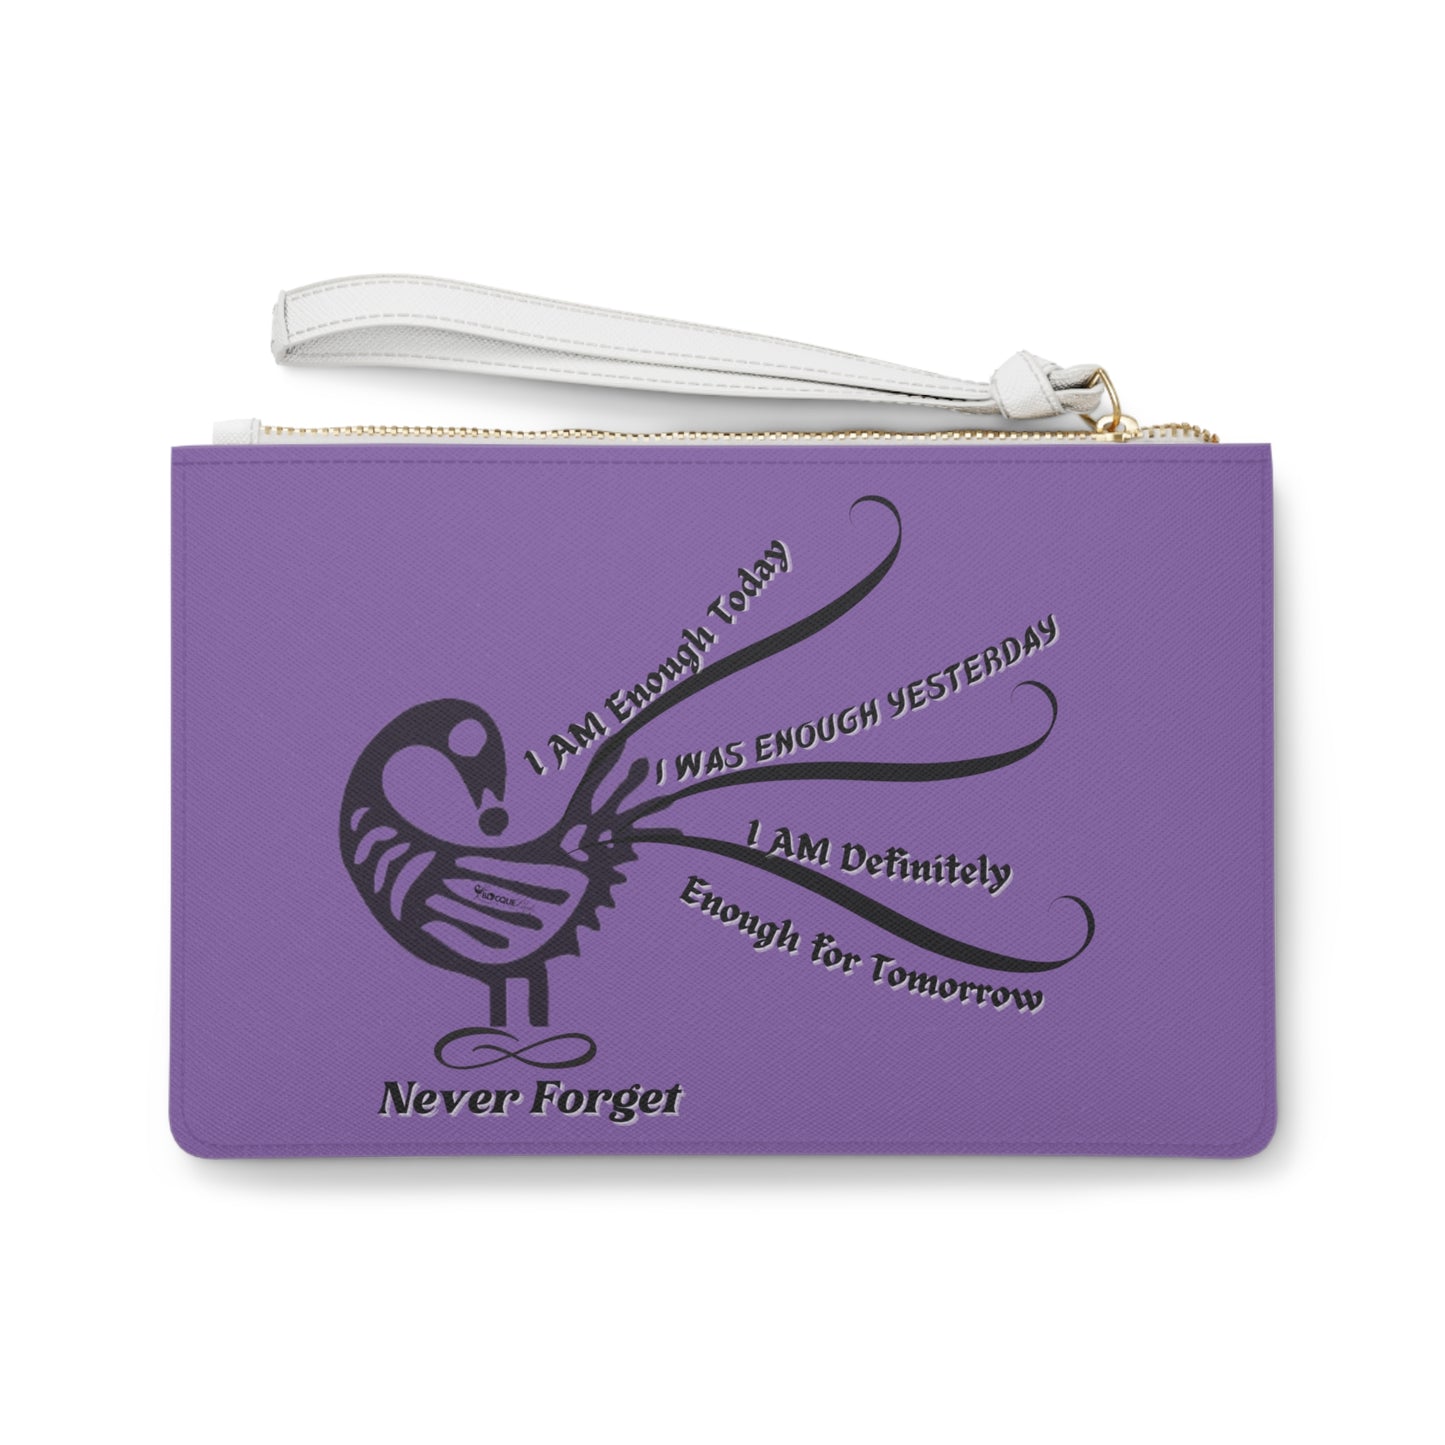 I AM More Than Enough- Positive Afrocentric Affirmation Vegan Leather Clutch Bag- Empower Your Style and Self-Love; Purple Clutch